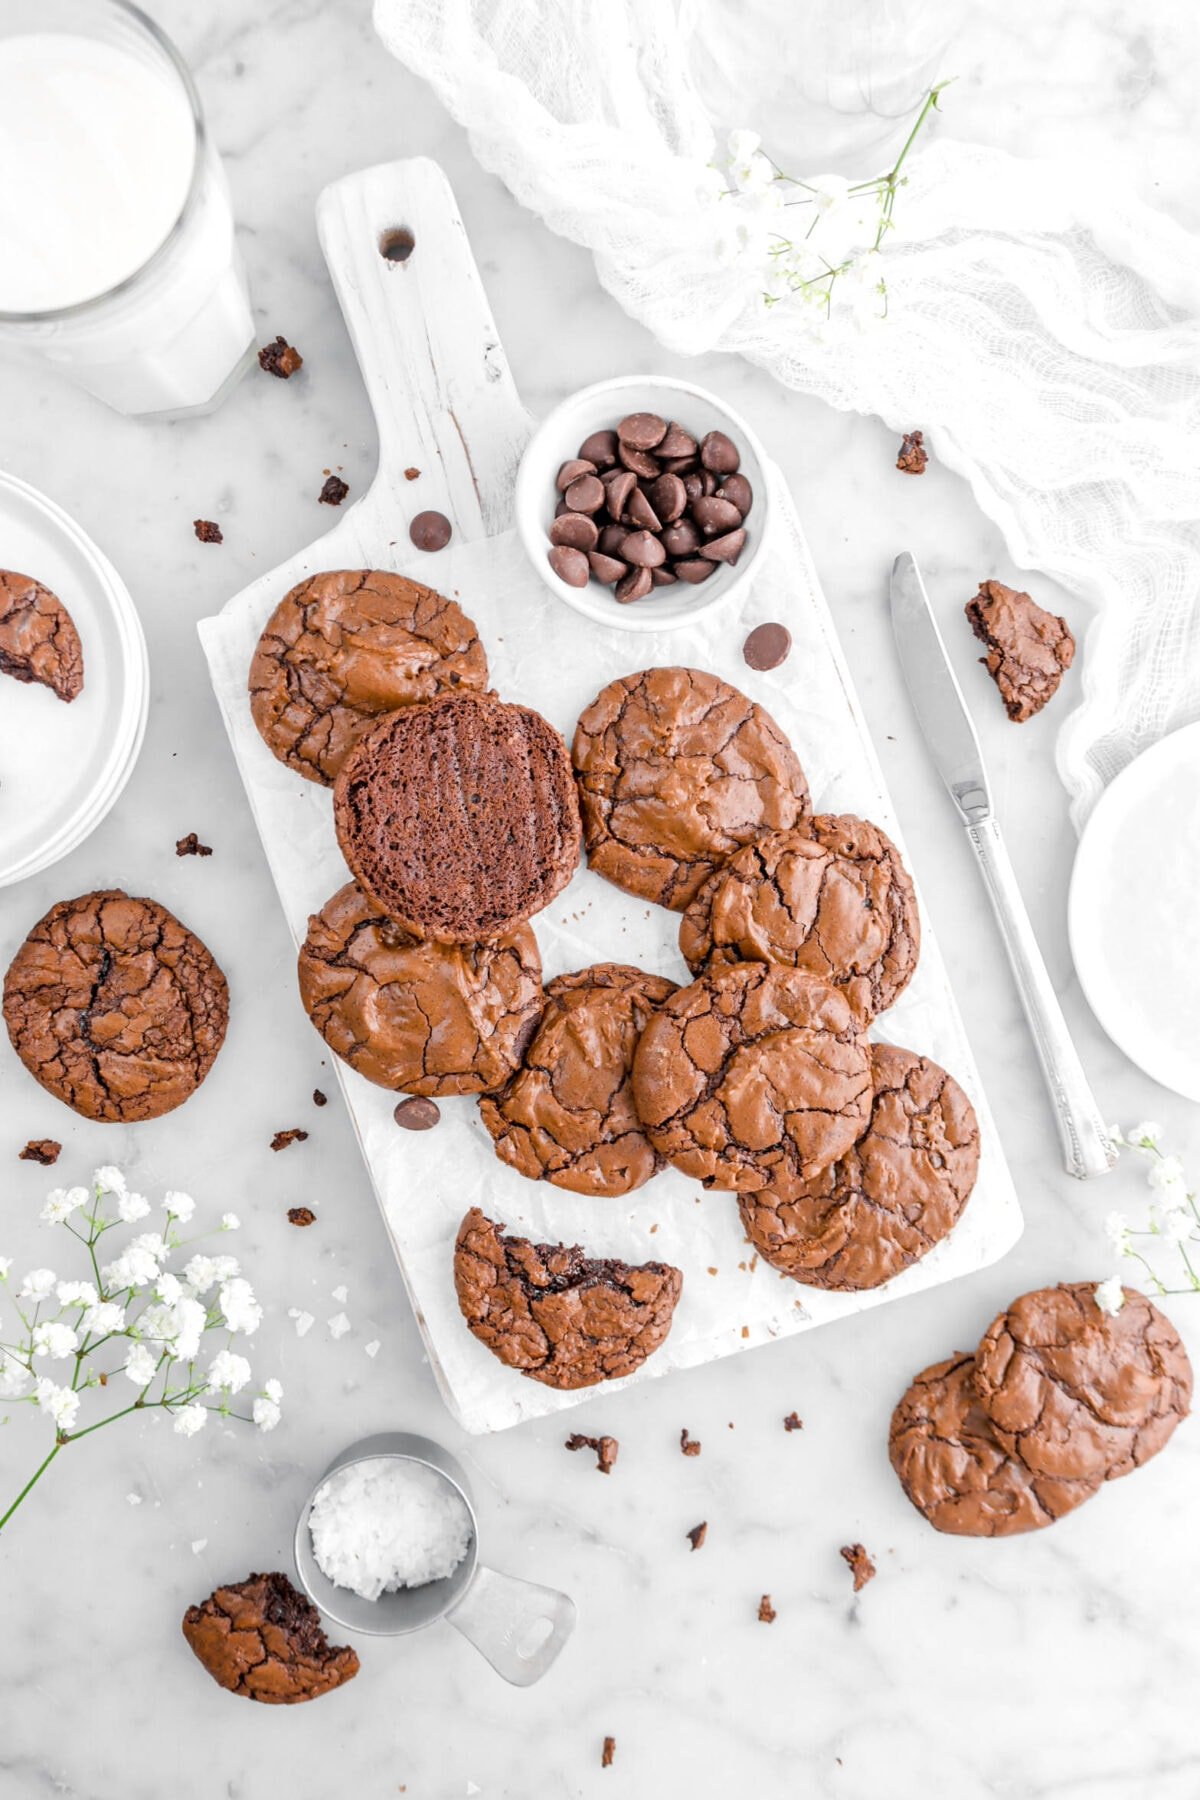 overhead shot of brownie cookies on white wood board with bowl of chocolate chips beside, cookies around, knife beside, glass of milk, flowers, and cookie crumbs around on marble surface